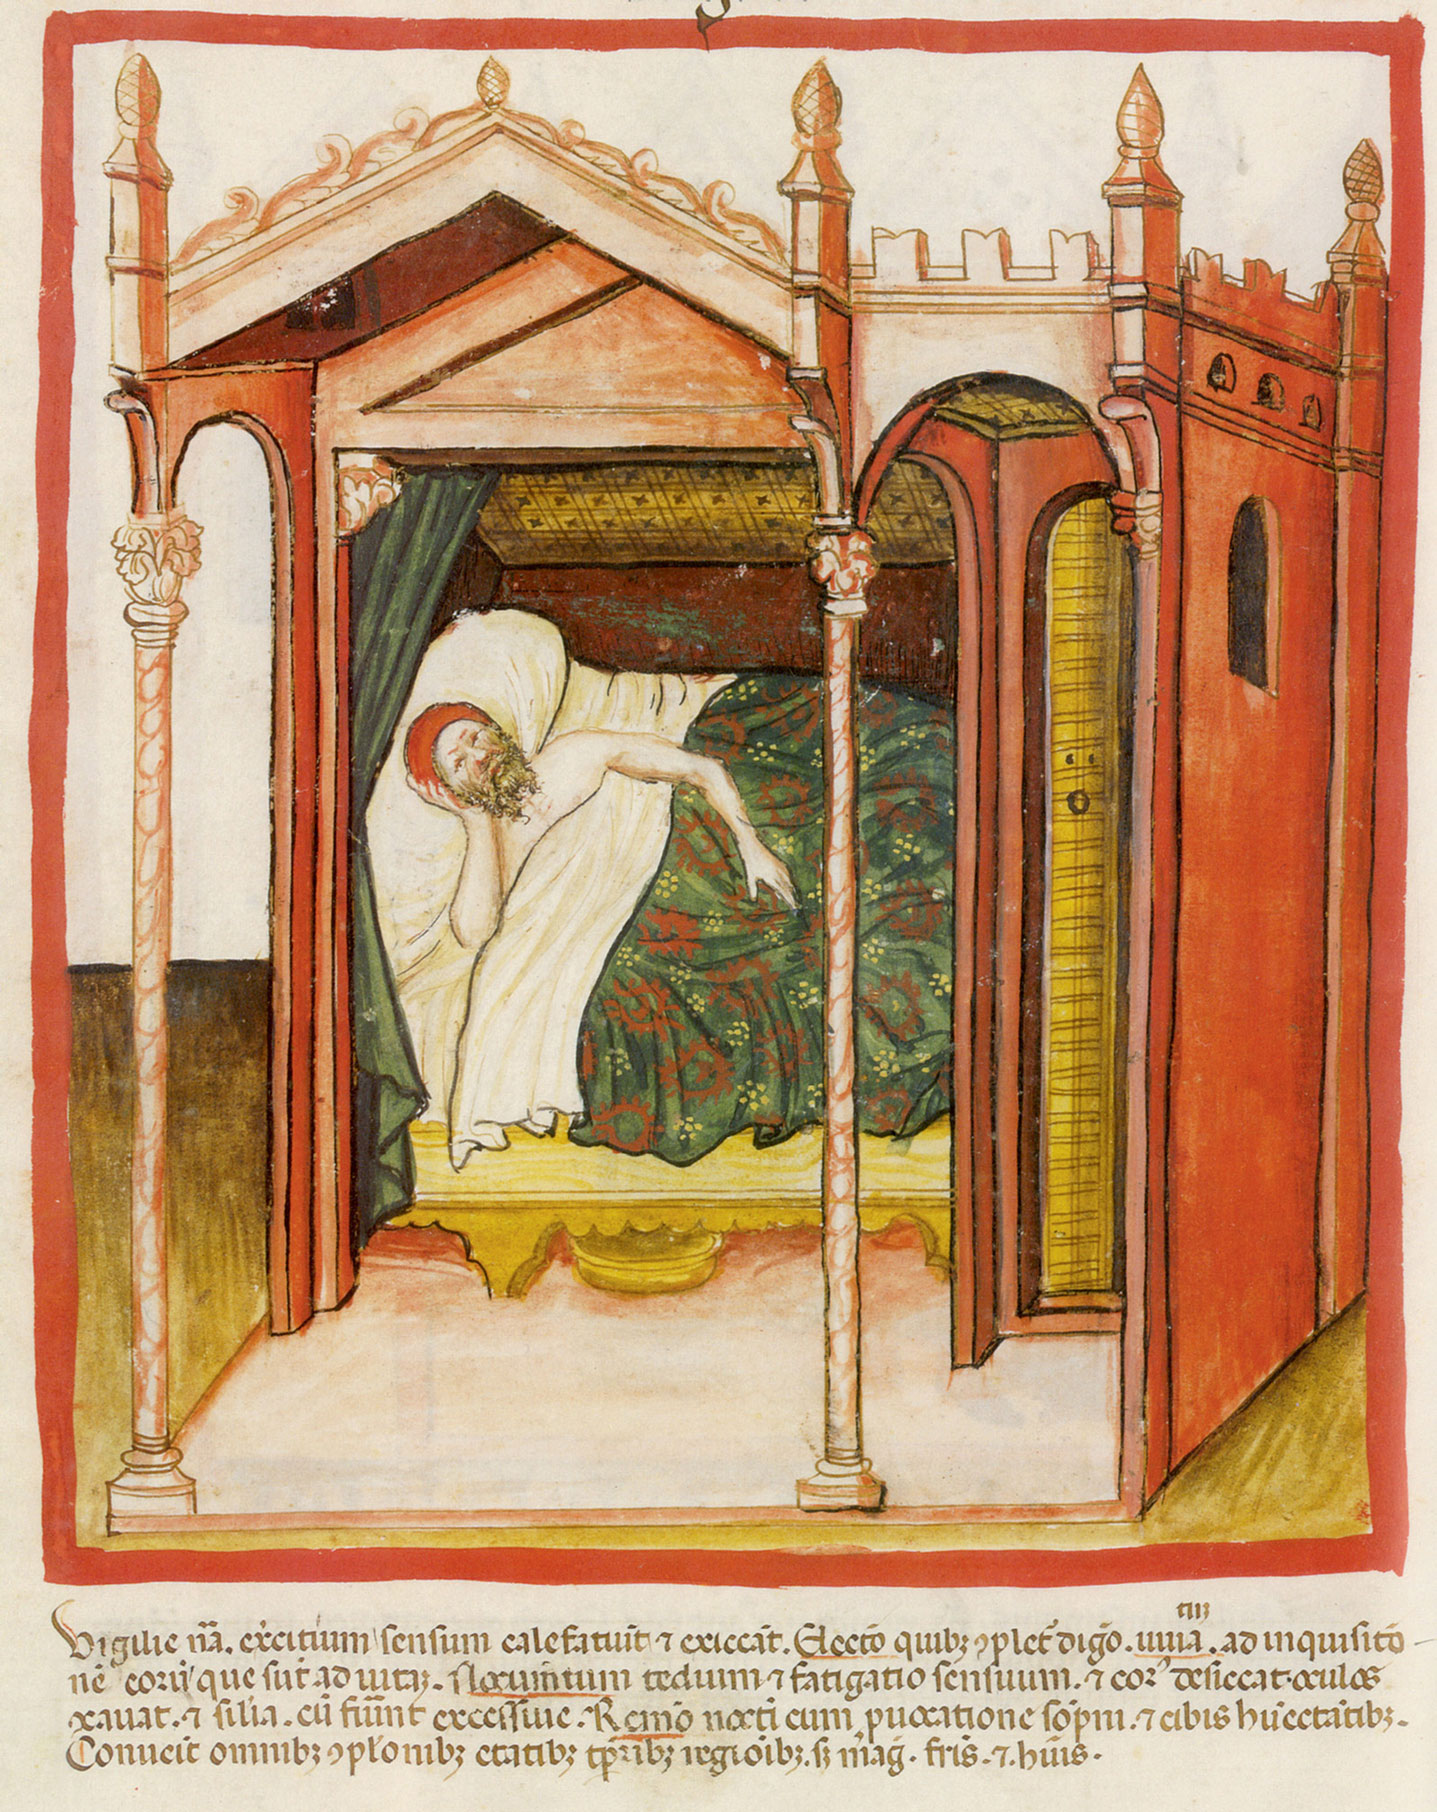 An illustration titled “The Insomniac” from a late-fourteenth-century medical manuscript. 